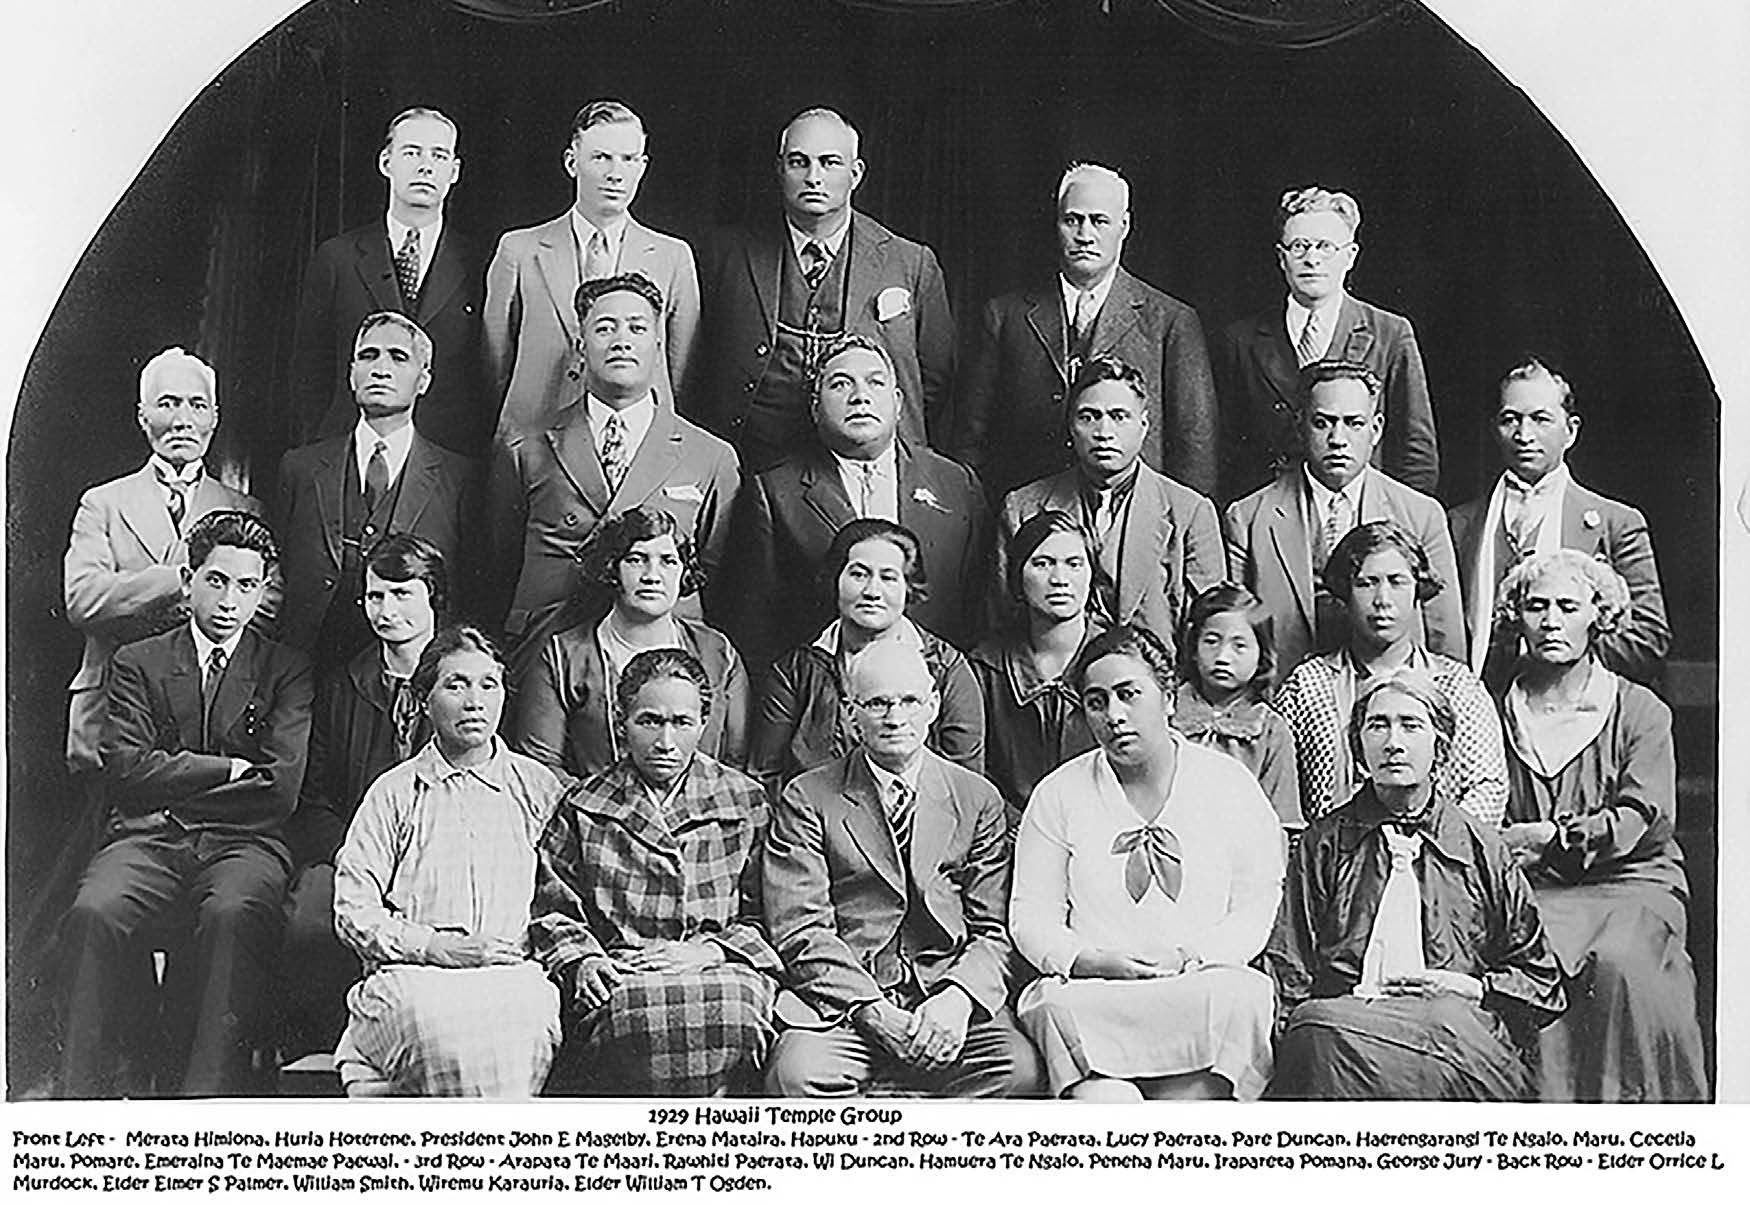 1929 Māori temple group. Despite numerous hindrances, this group persisted and was finally able to journey to the Hawaii Temple. Courtesy of Hyran Smith.